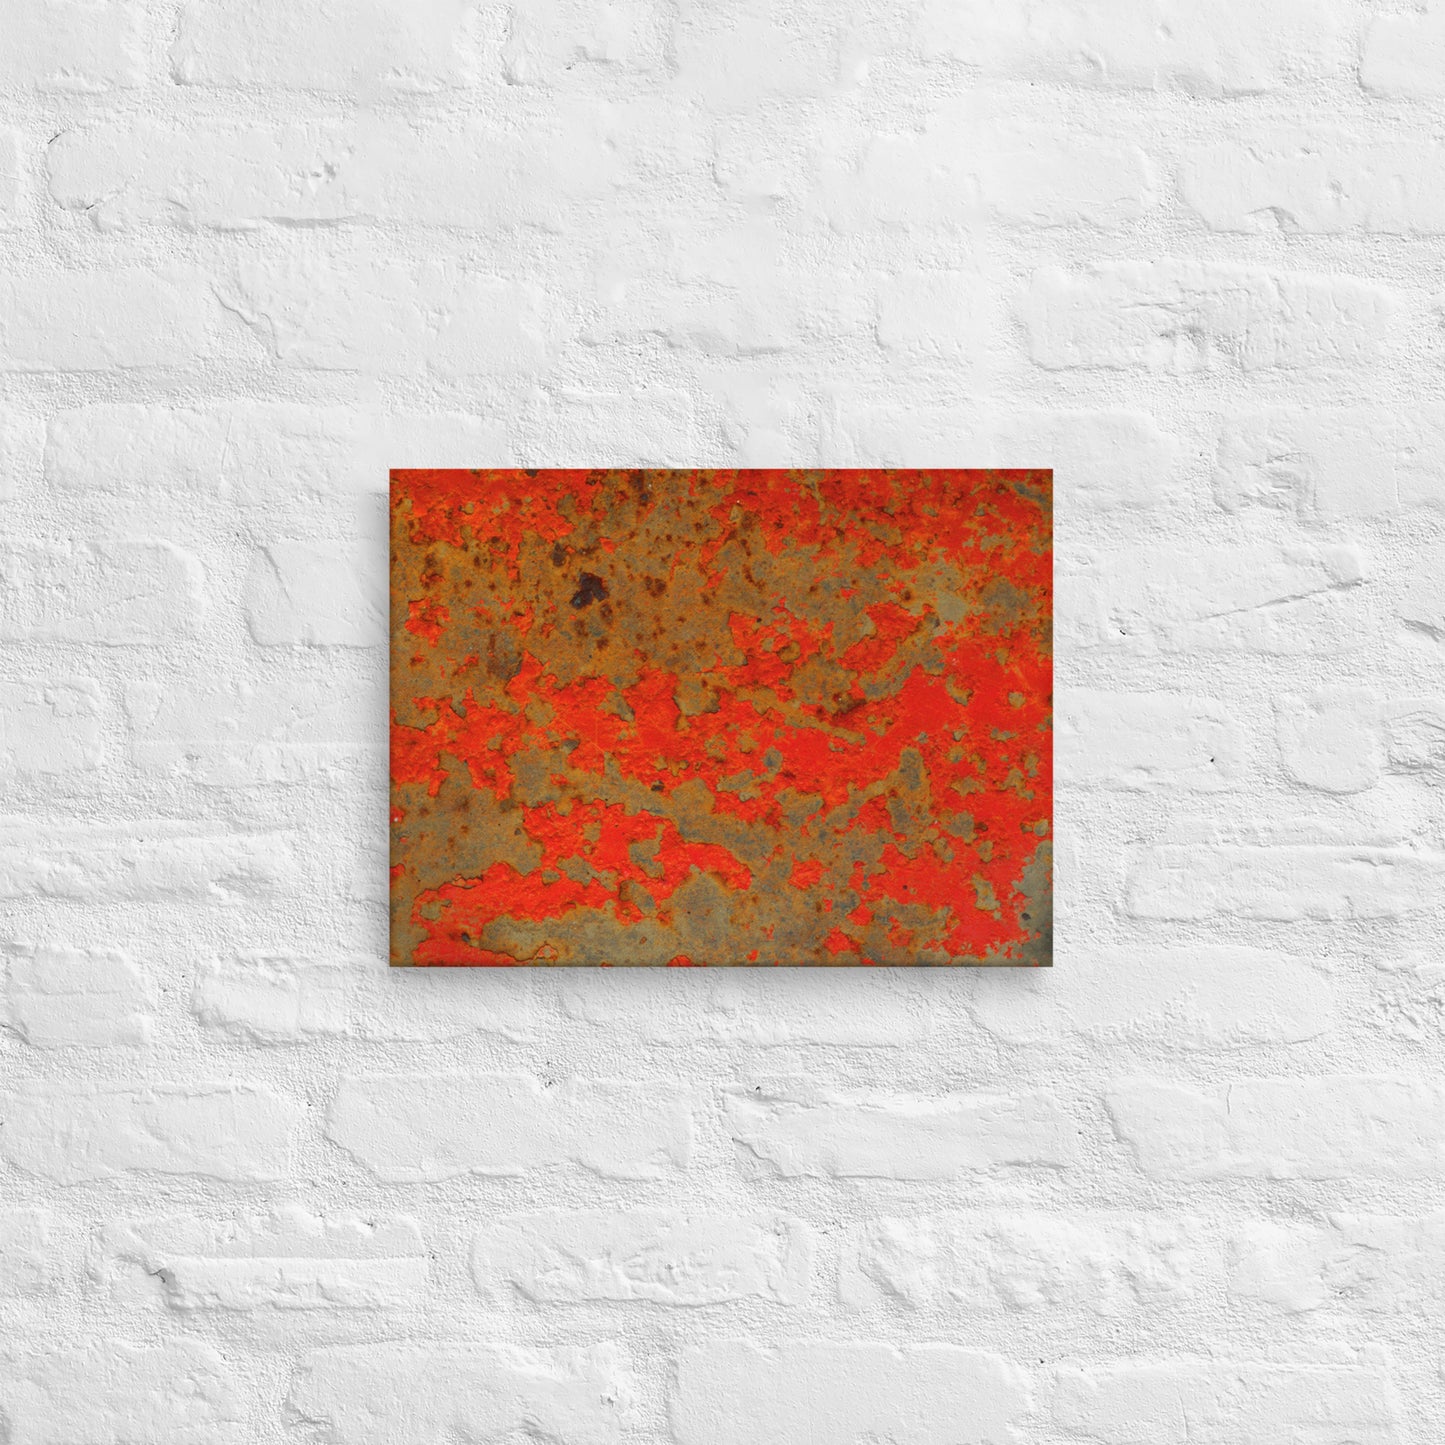 Thin canvas, Red Rust